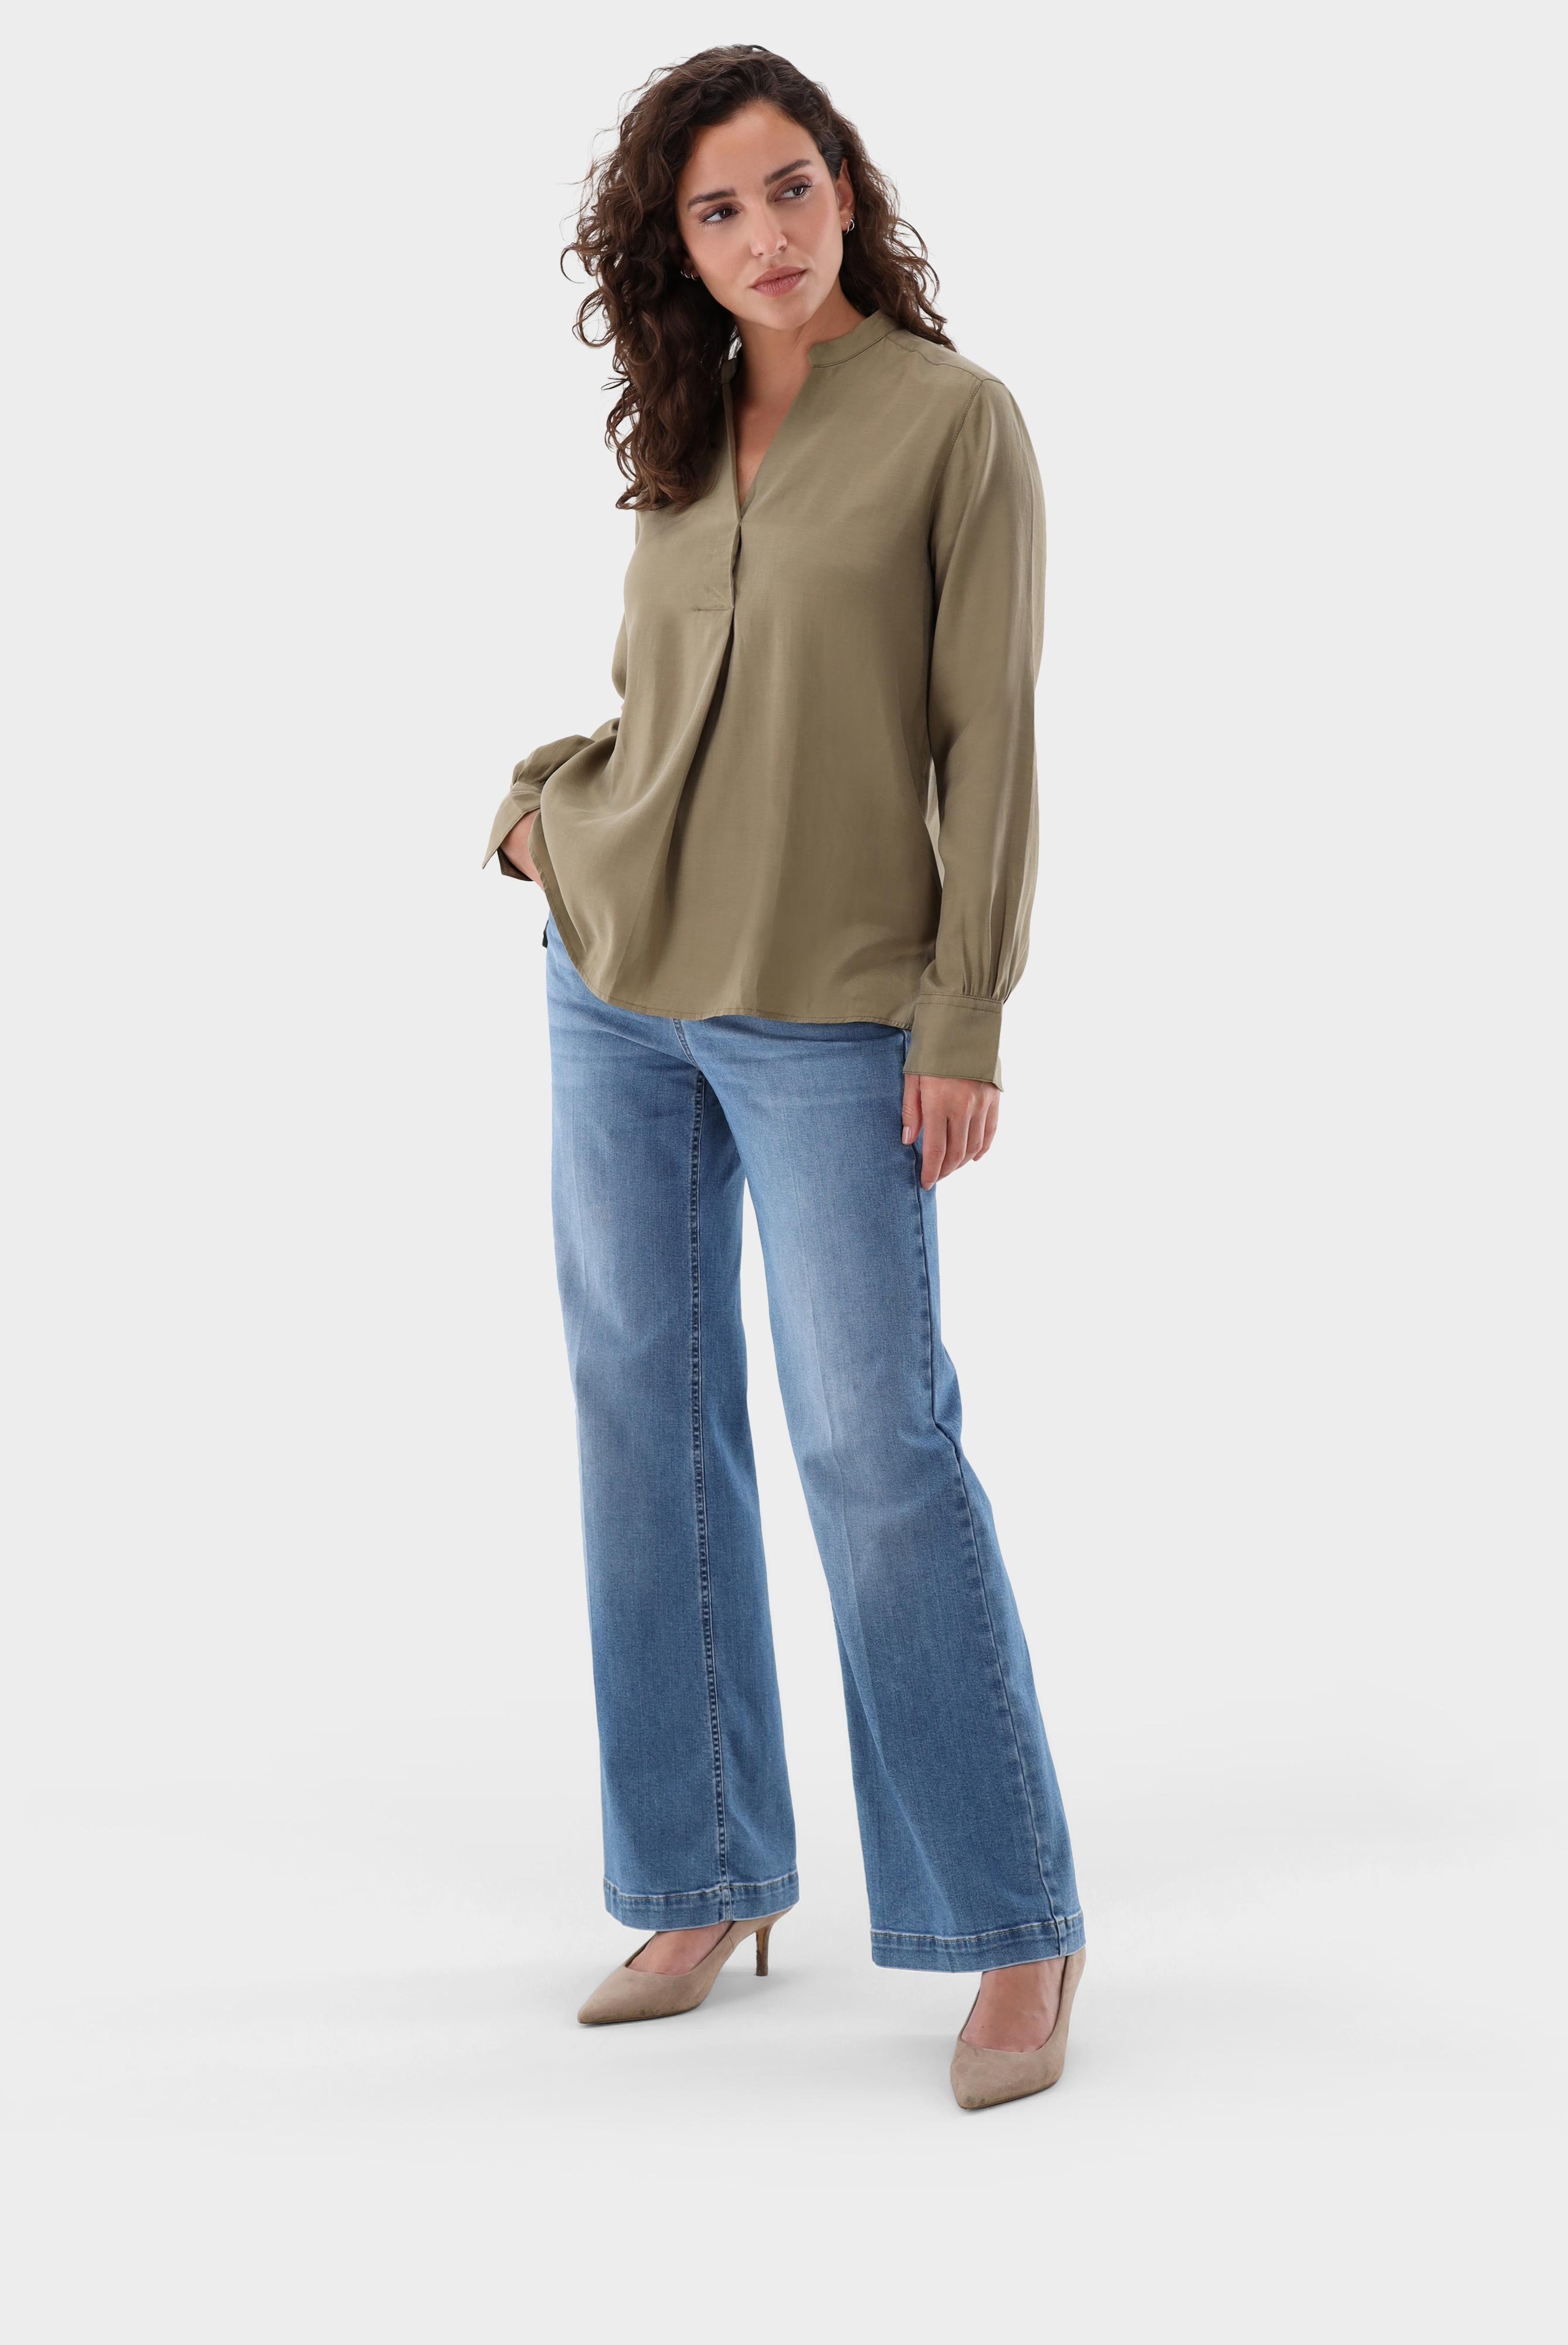 Casual Blouses+Stand-up Collar Shirt with lyocell and cotton+05.527Y.49.150258.960.38